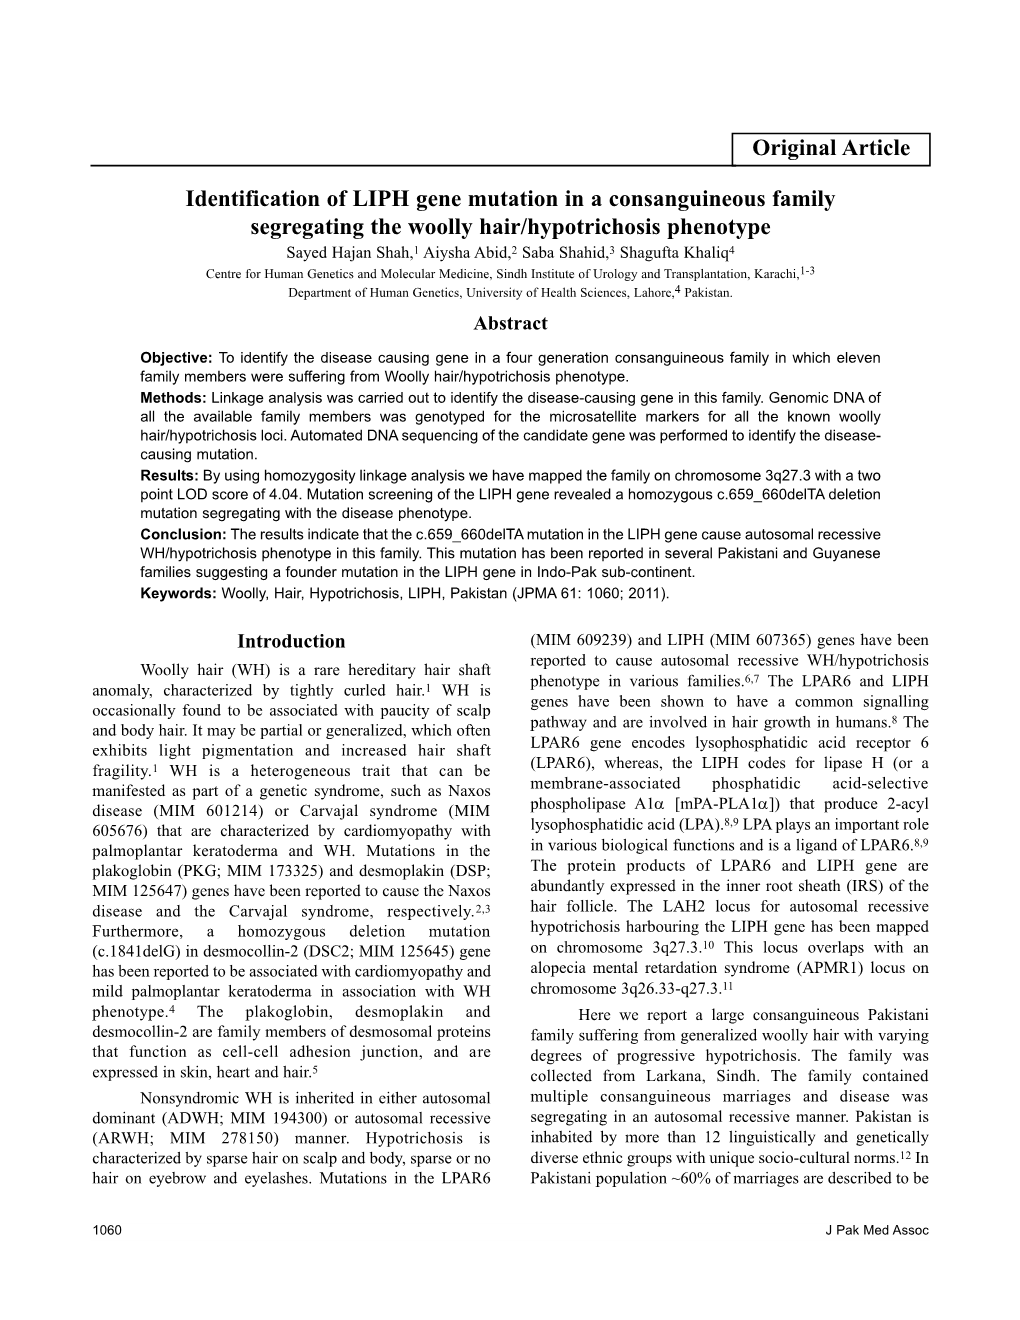 Identification of LIPH Gene Mutation in a Consanguineous Family